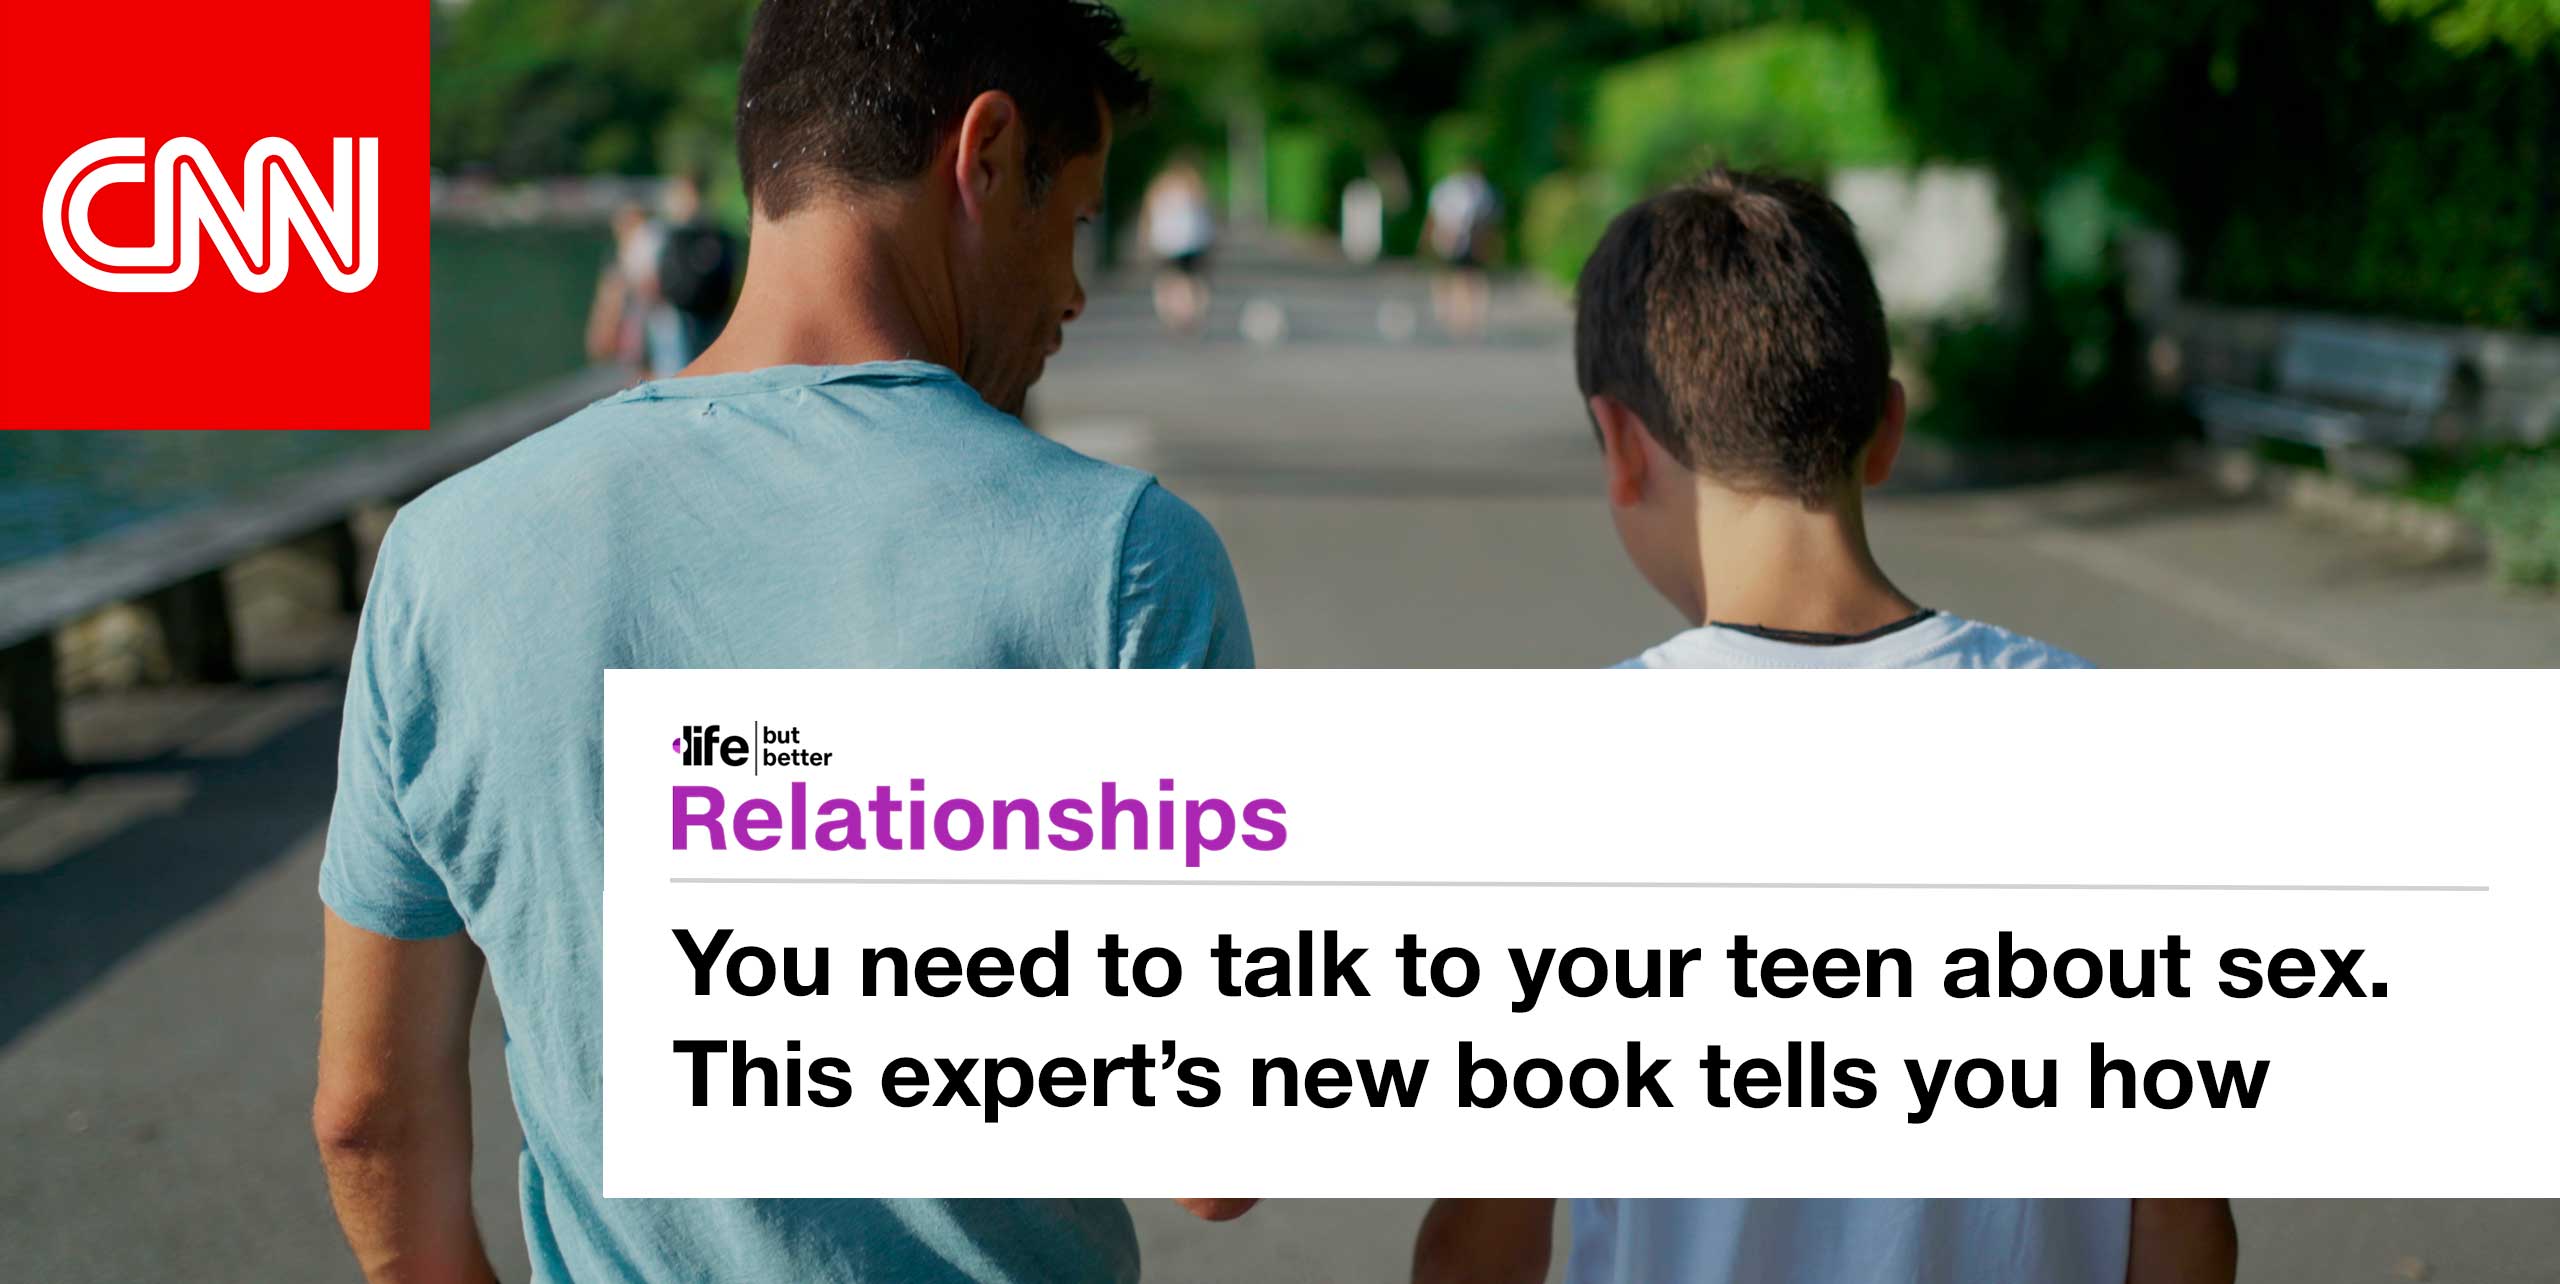 CNN logo and photo of father and son in conversation. CNN tagline: life but better. Section: Relationships Headline: You need to talk to your teen about sex. This expert’s new book tells you how